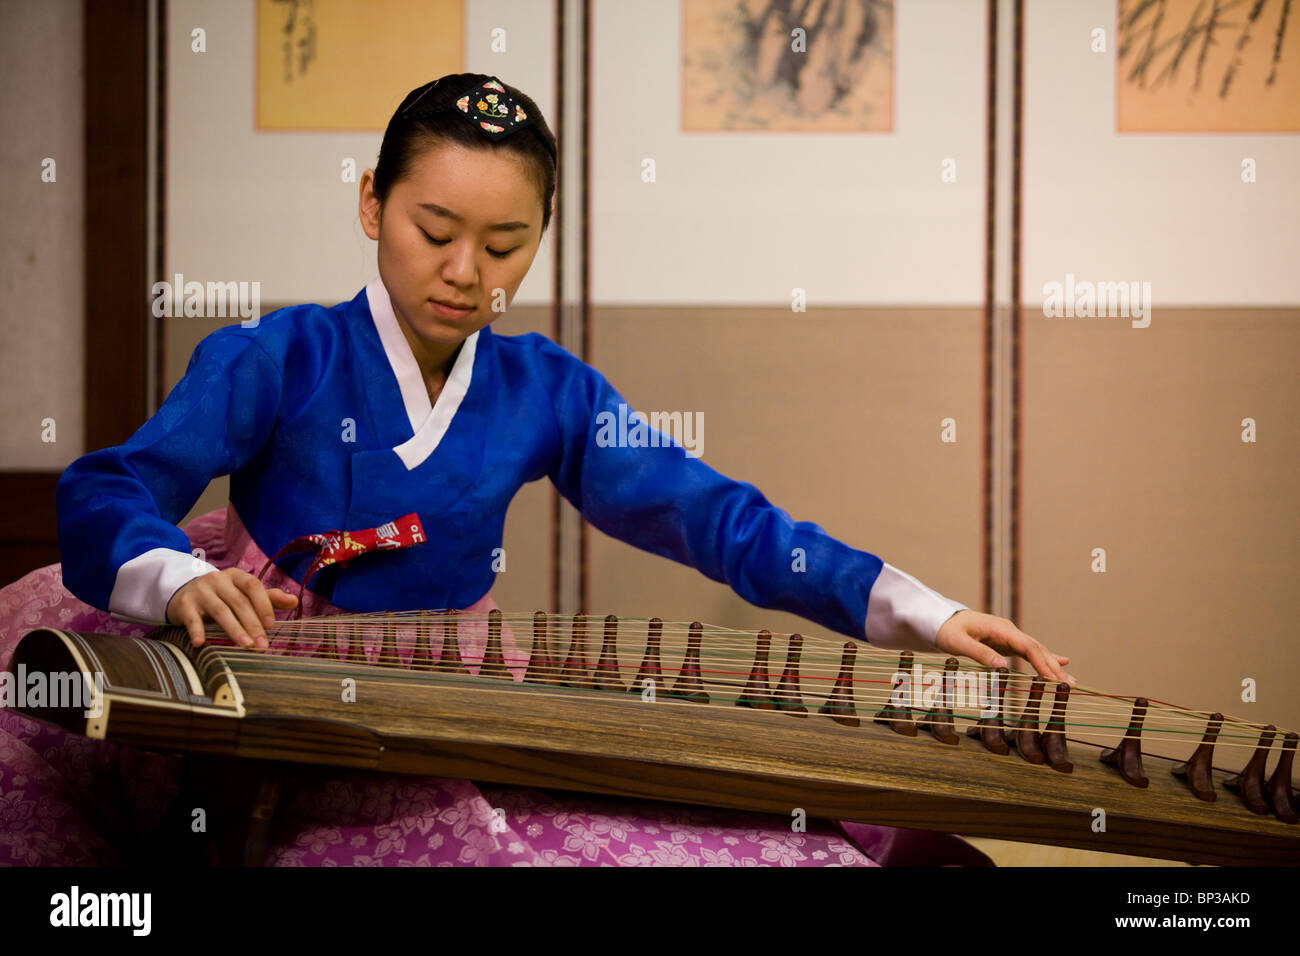 South Korean traditional musical performance Stock Photo